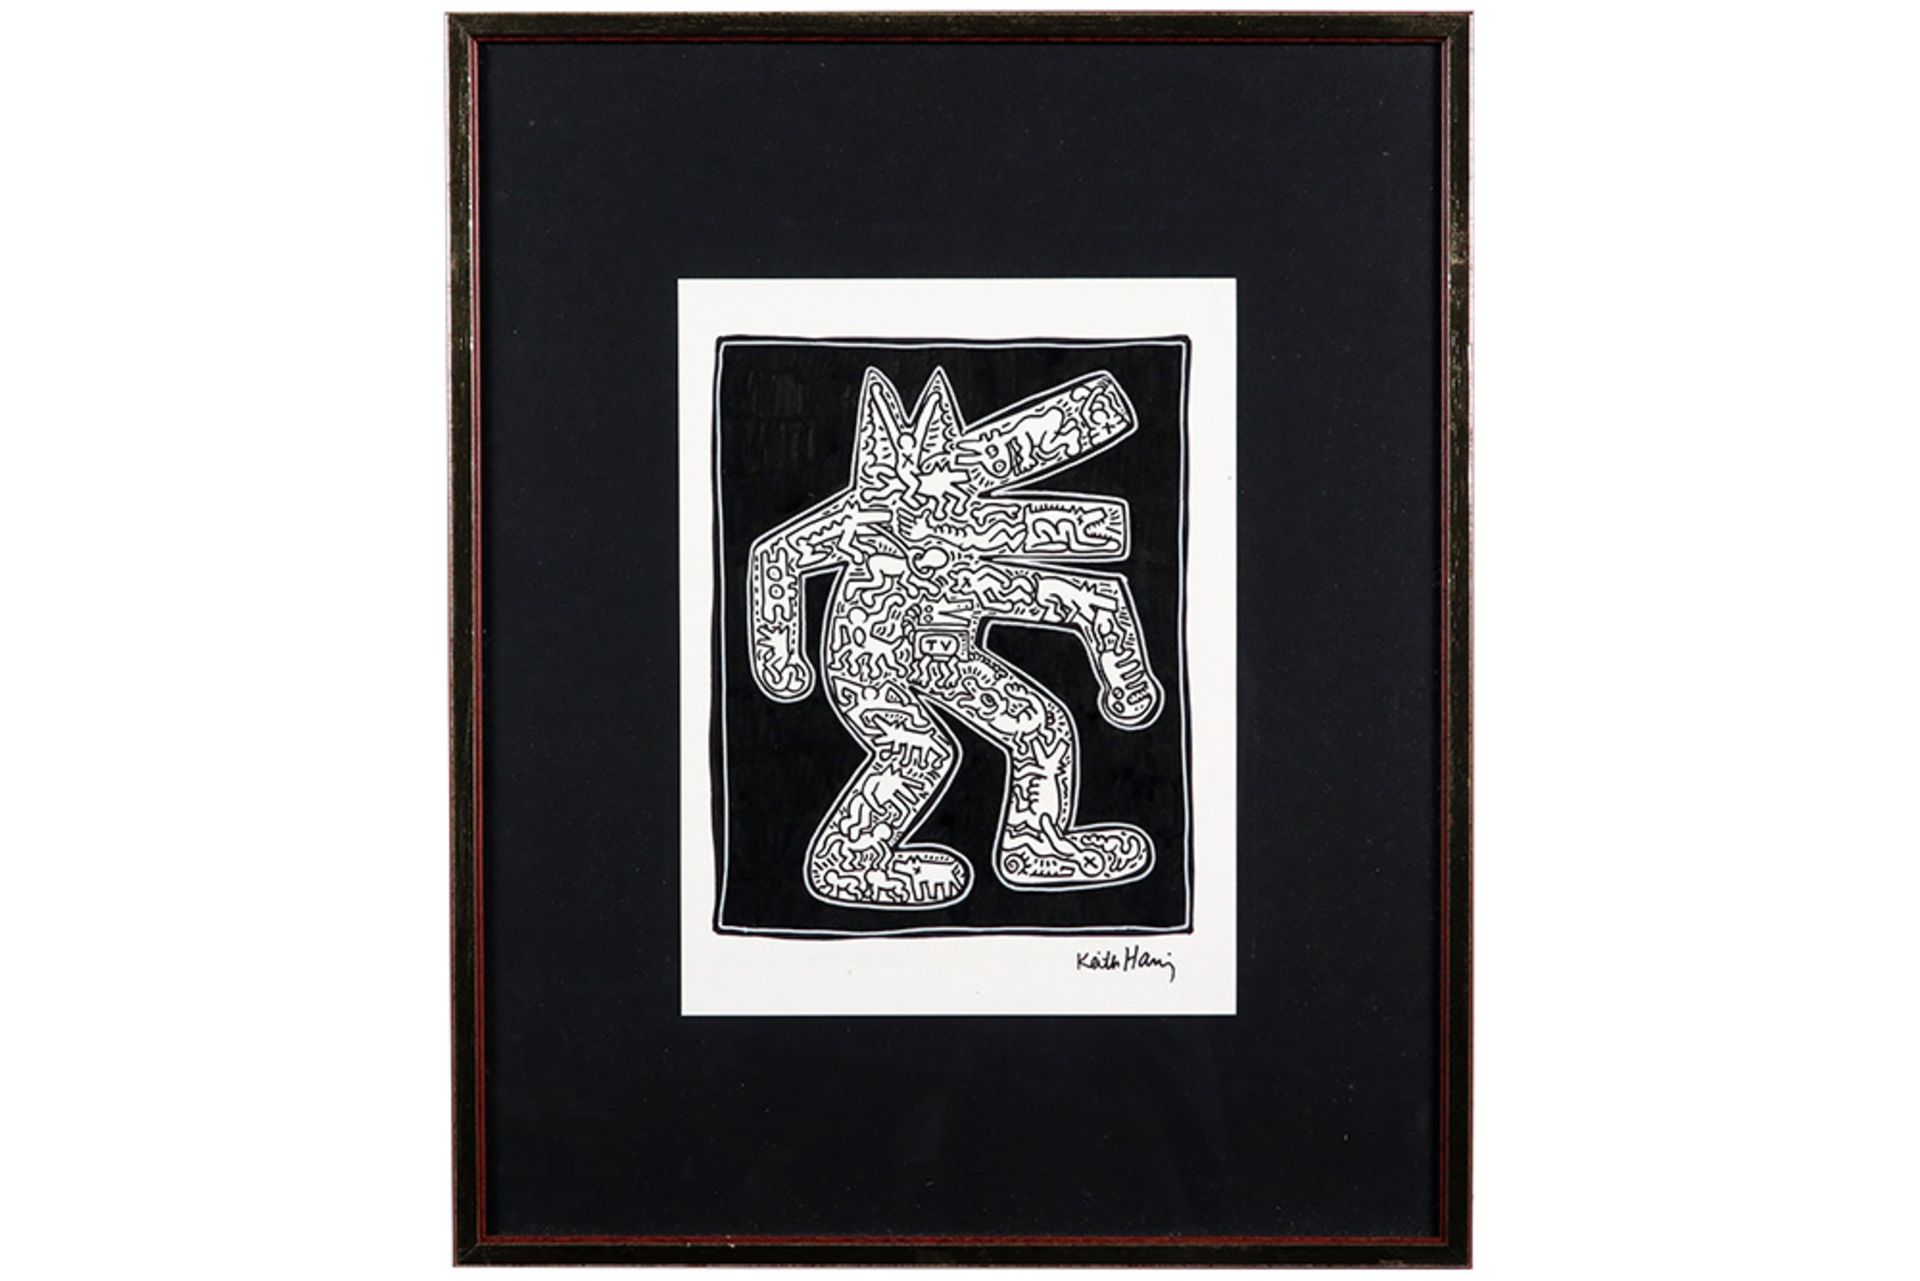 Keith Haring black felt tip pen drawing with typical figuration in a walking dog - signed || - Image 4 of 4